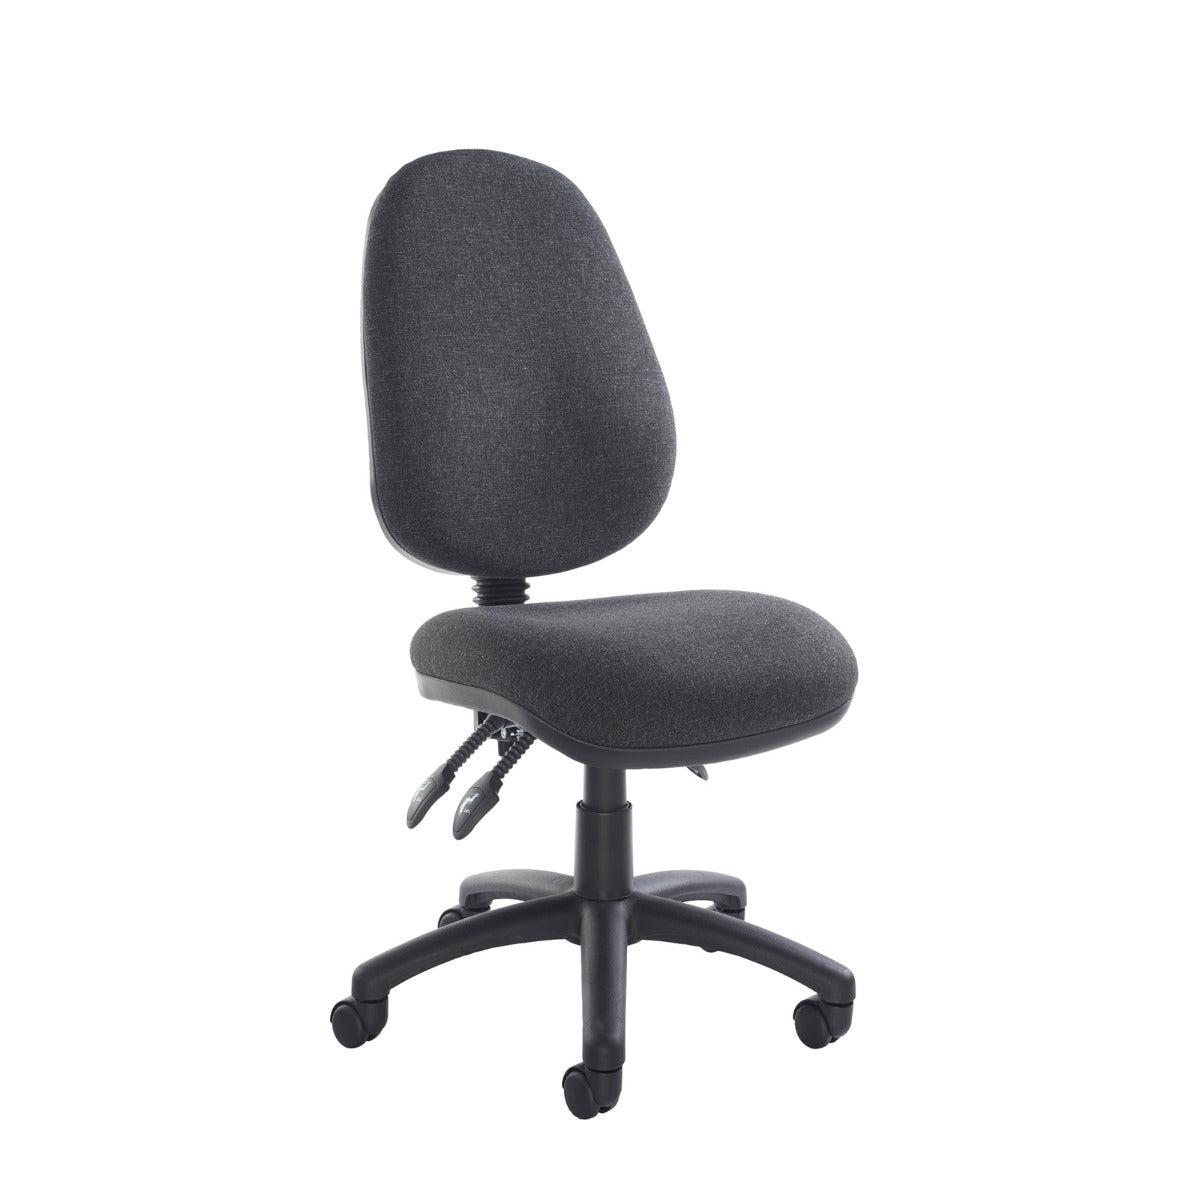 Vantage 200 Fabric Operator Chair - V200 - Black, Blue, Charcoal or Red Option